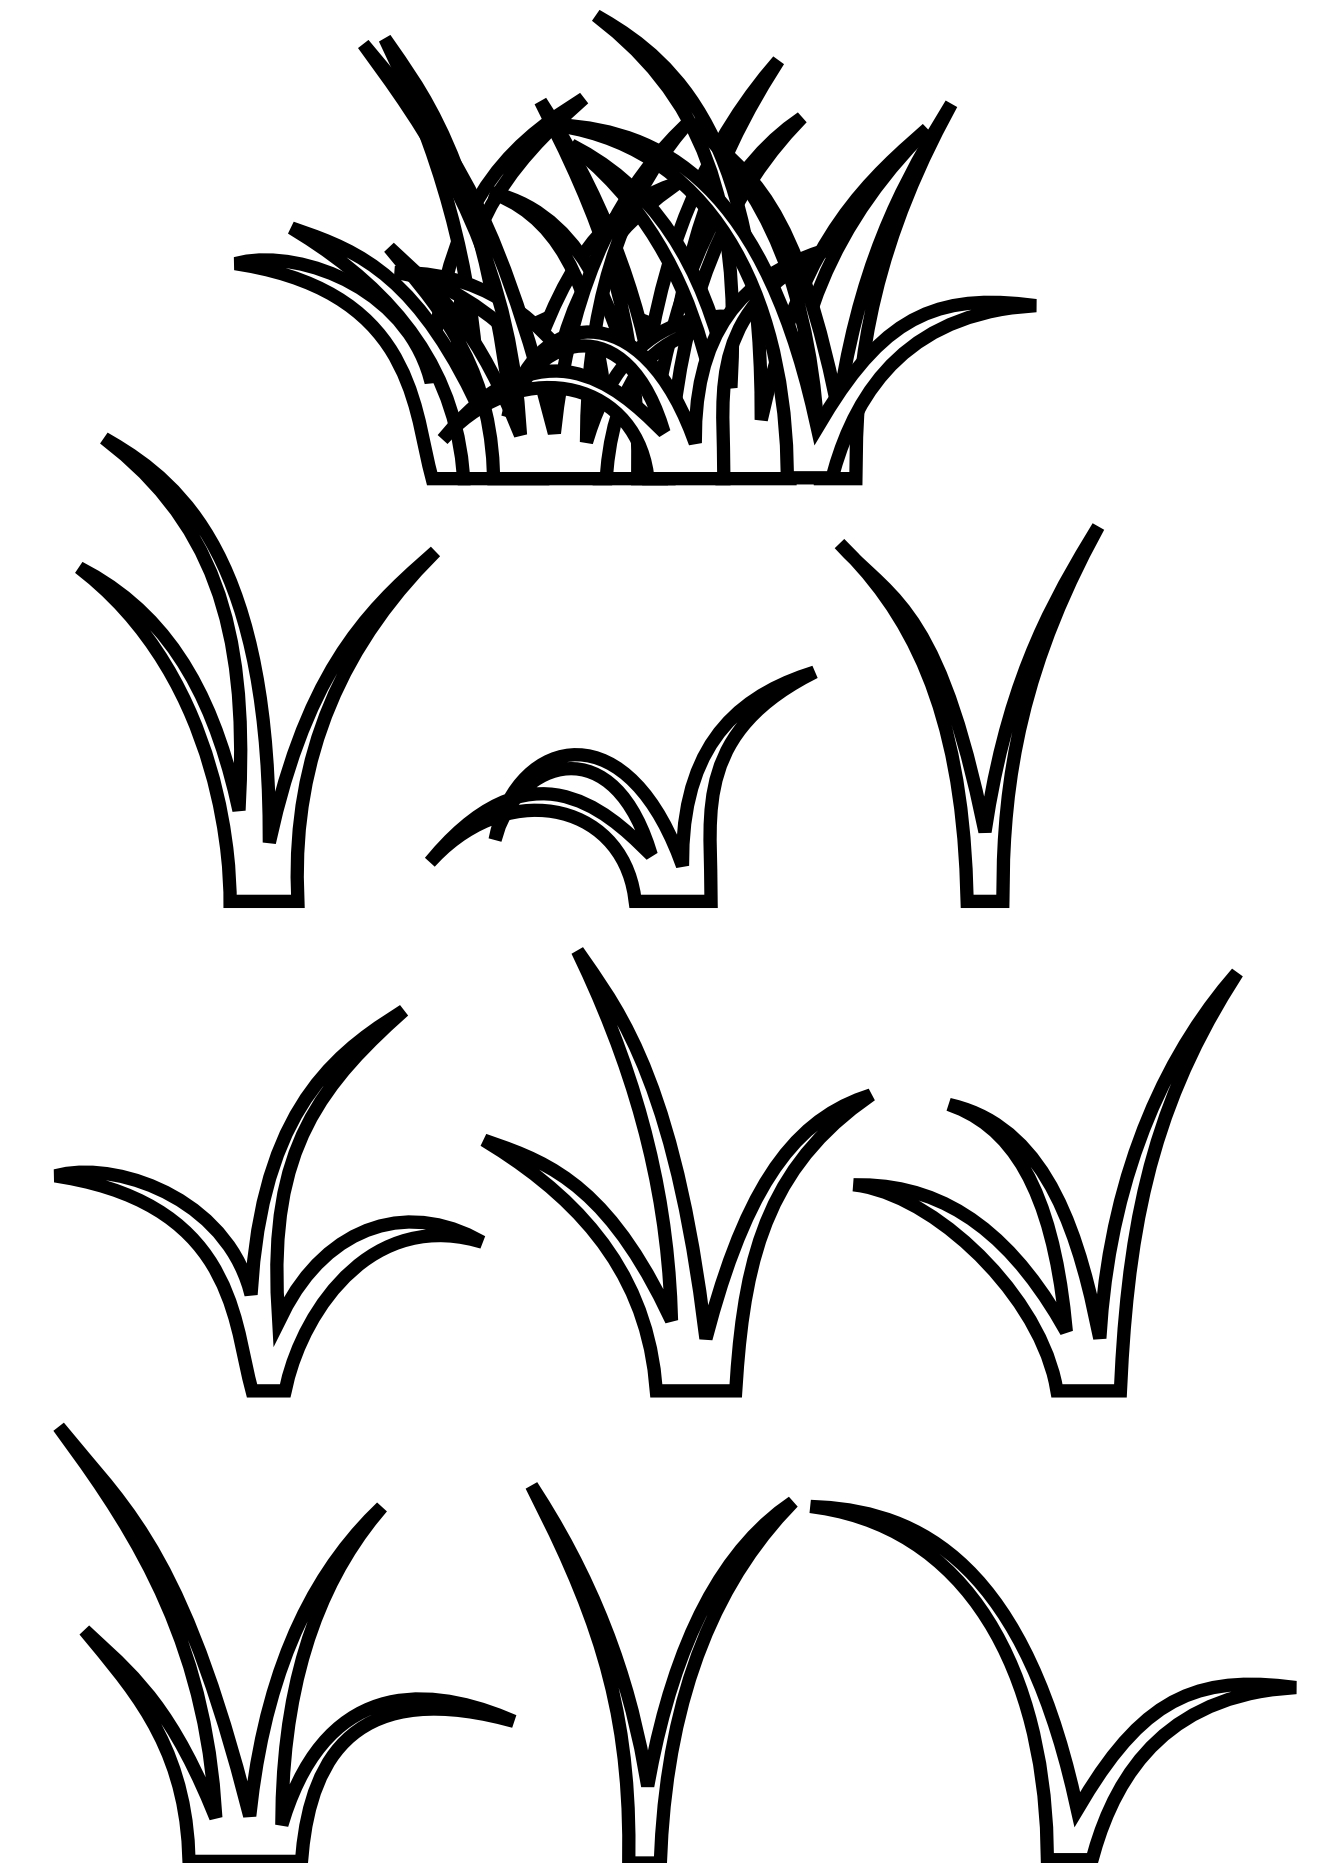 Grass Clipart Black And White | Clipart library - Free Clipart Images